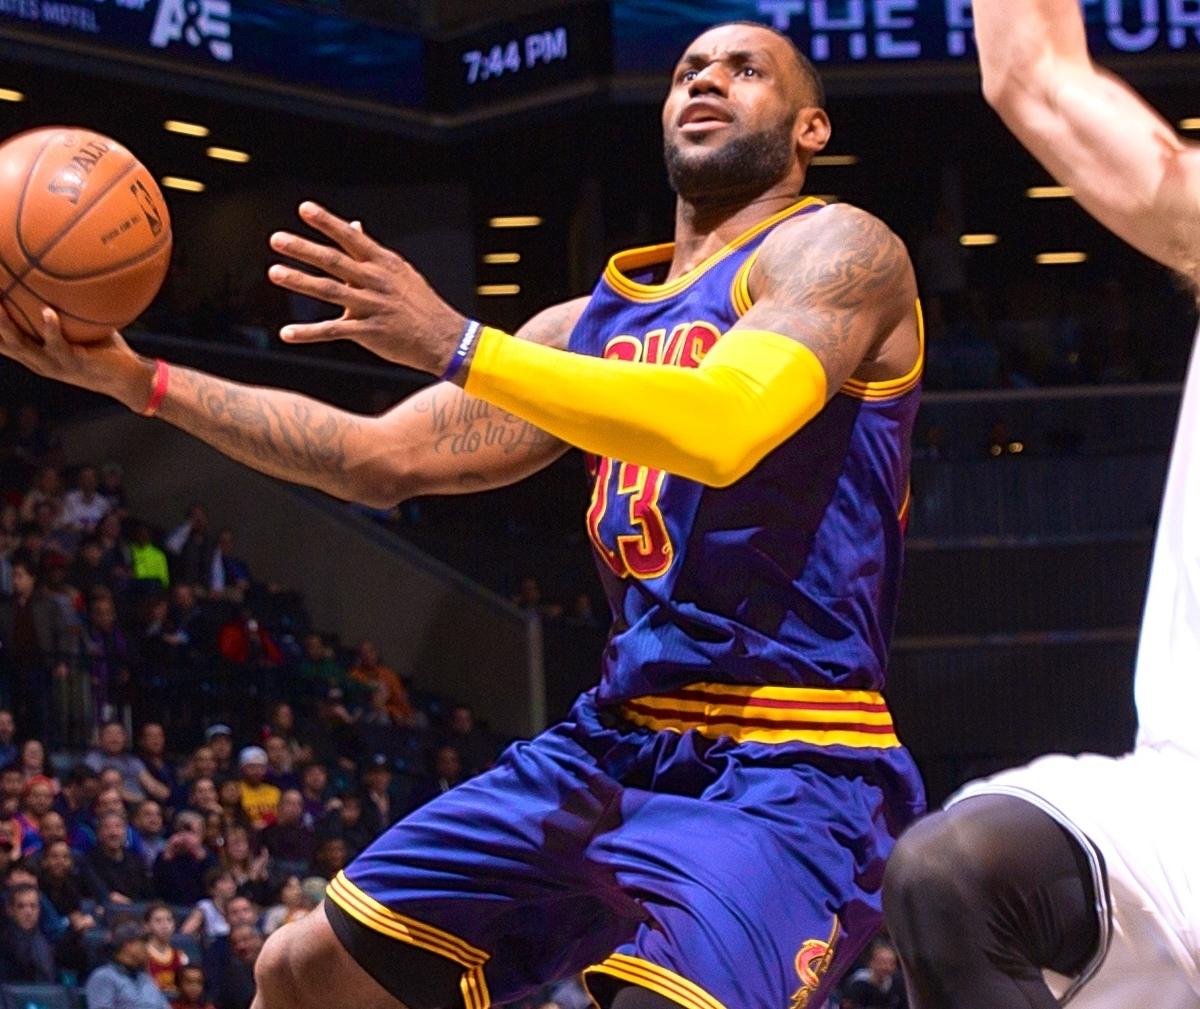 LeBron James Passes Patrick Ewing for 20th on NBA's All-Time Scoring List